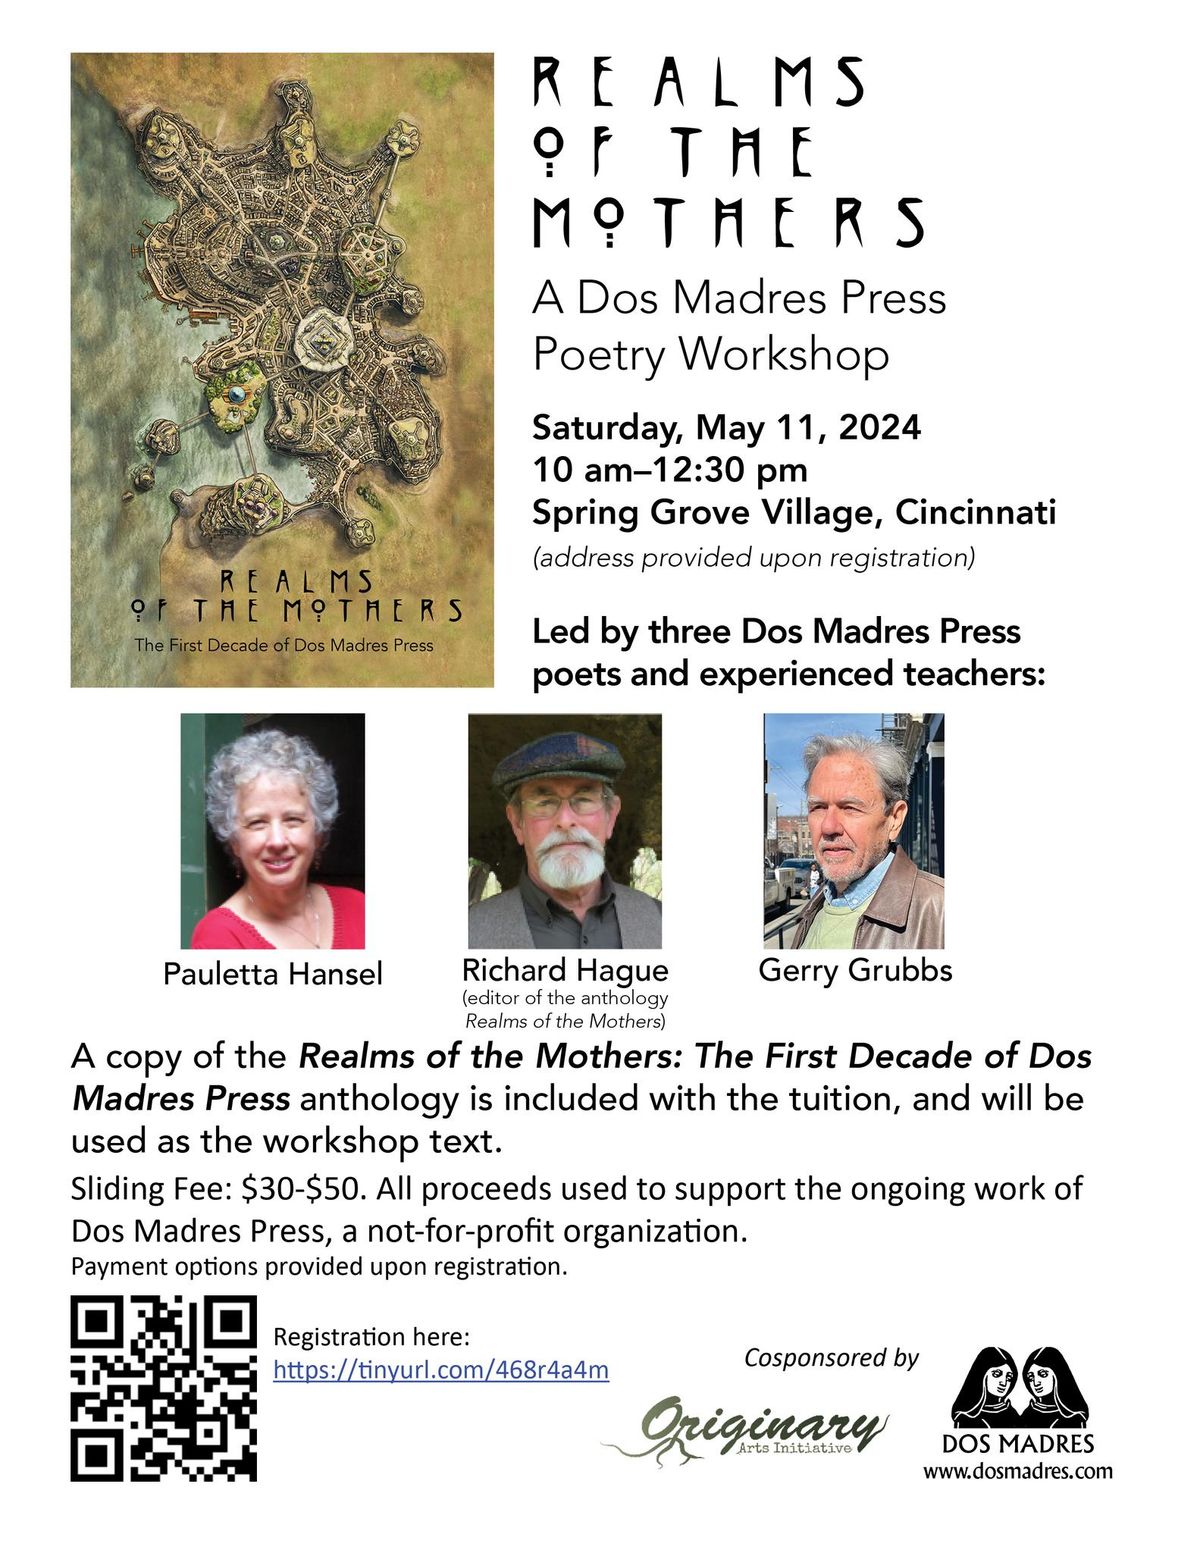 Realms of the Mothers - A Dos Madres Press Poetry Workshop